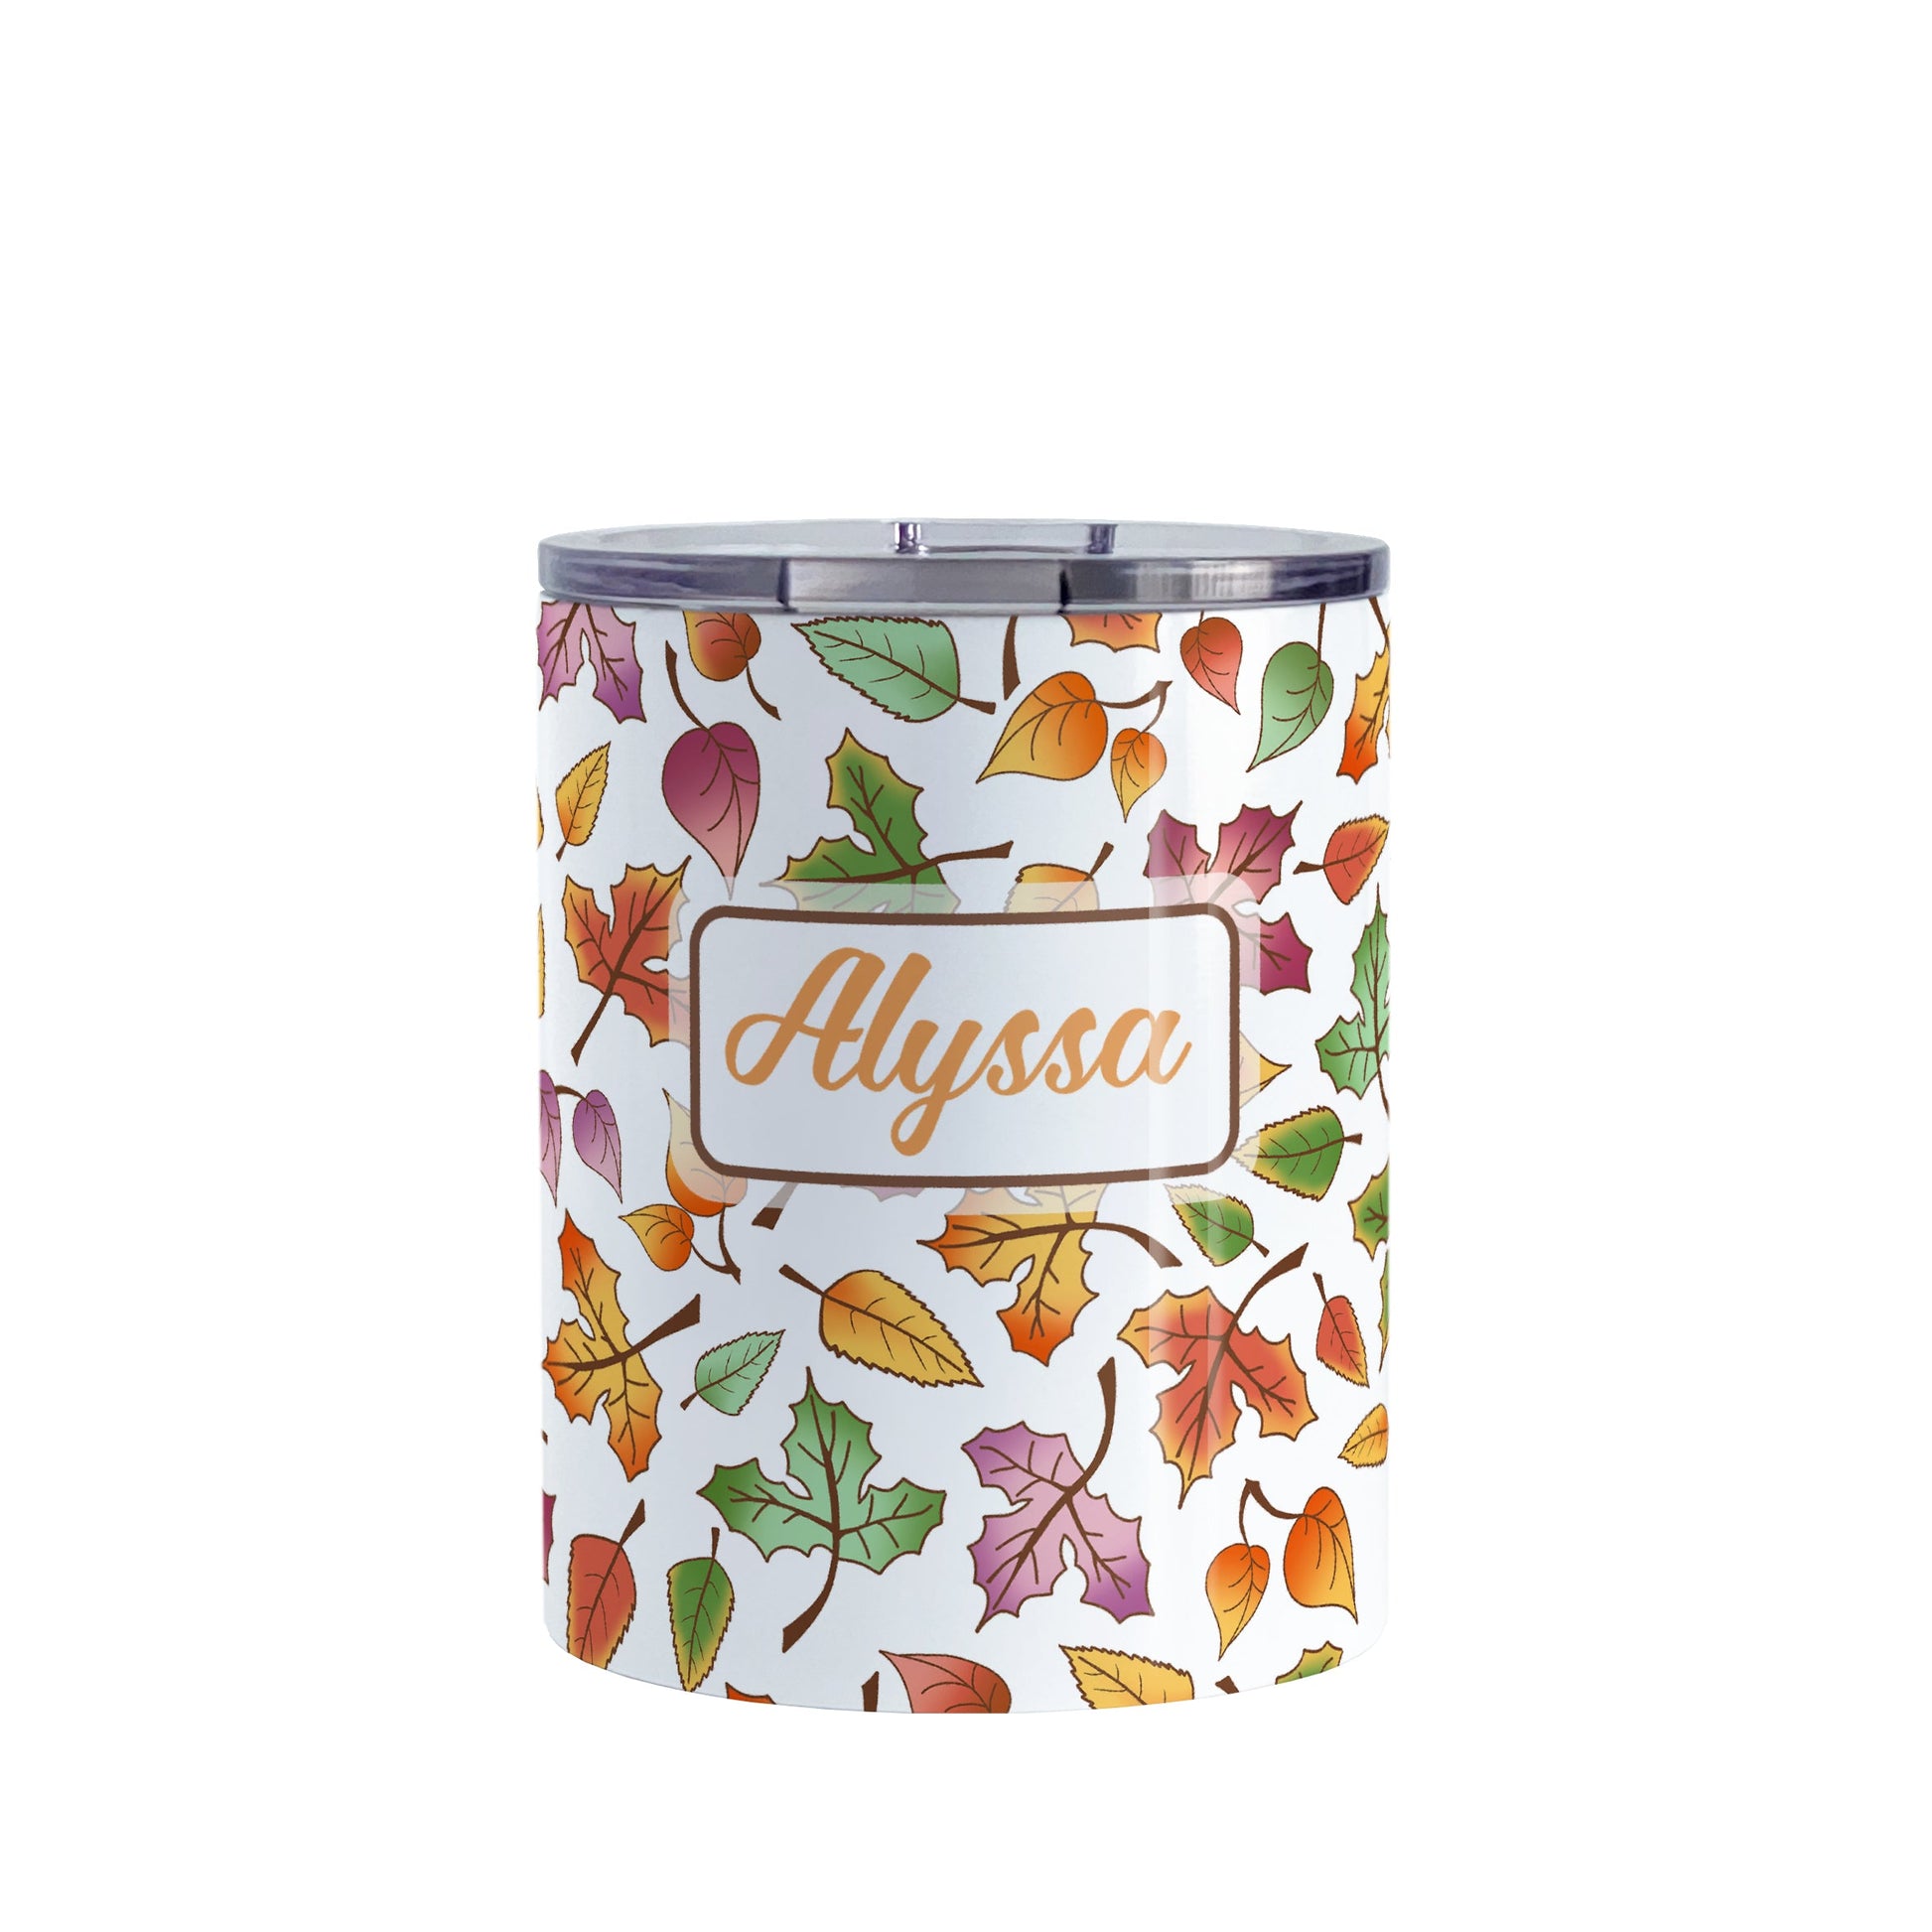 Personalized Changing Leaves Fall Tumbler Cup (10oz) at Amy's Coffee Mugs. A stainless steel insulated tumbler cup designed with a fall themed pattern of leaves changing colors, as they do at the beginning of autumn, that wraps around the cup. Your personalized name is custom printed in an orange script font in a white rectangle over the leaves pattern. 